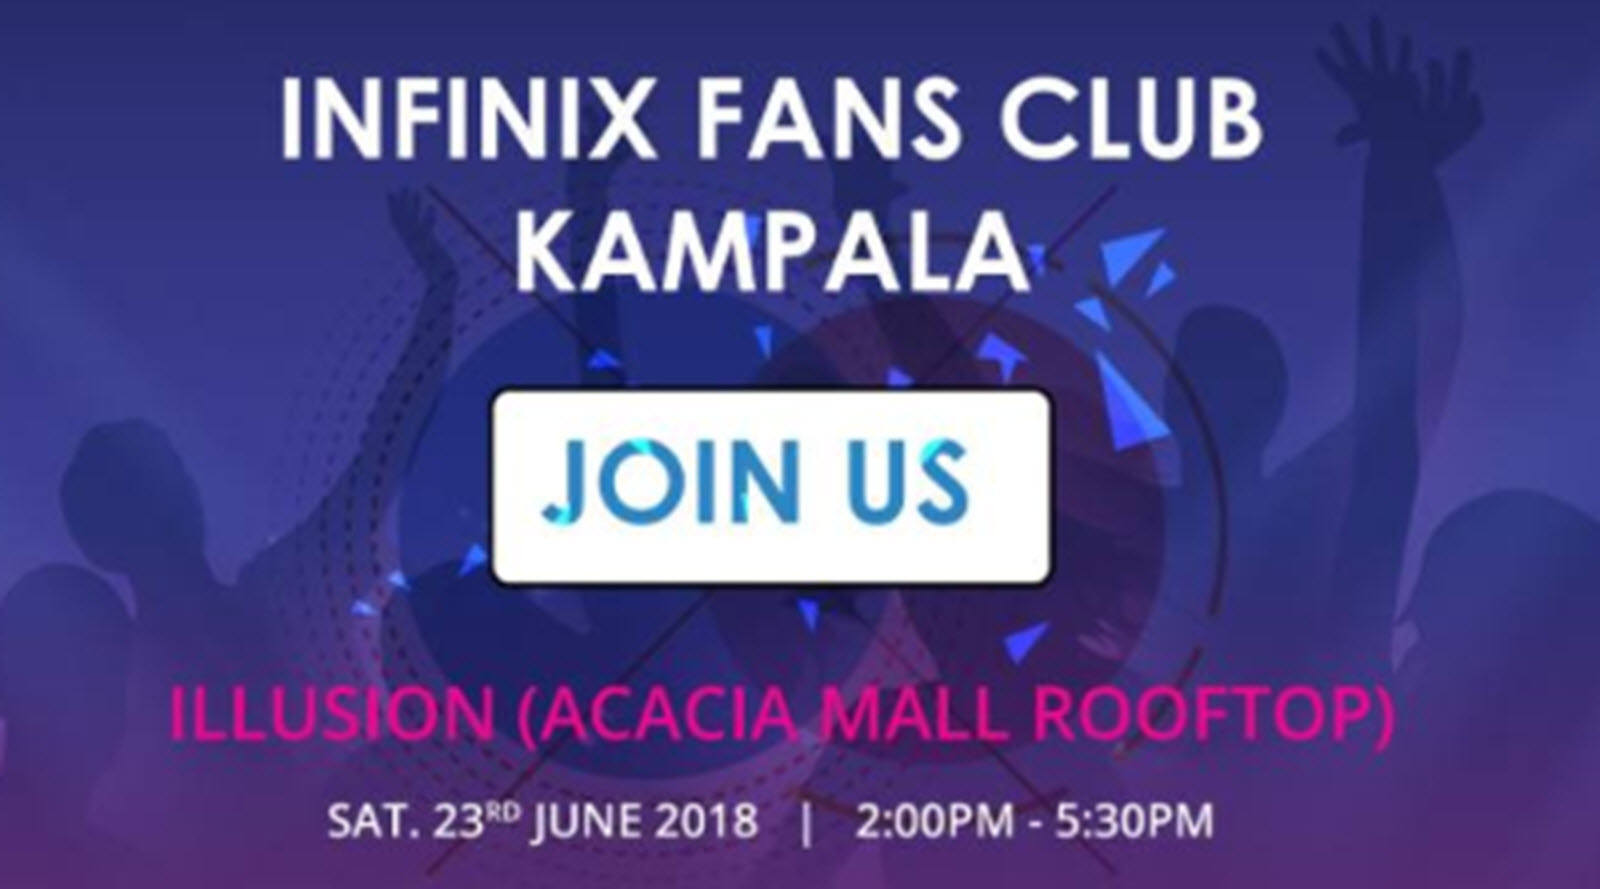 infinix fans day out